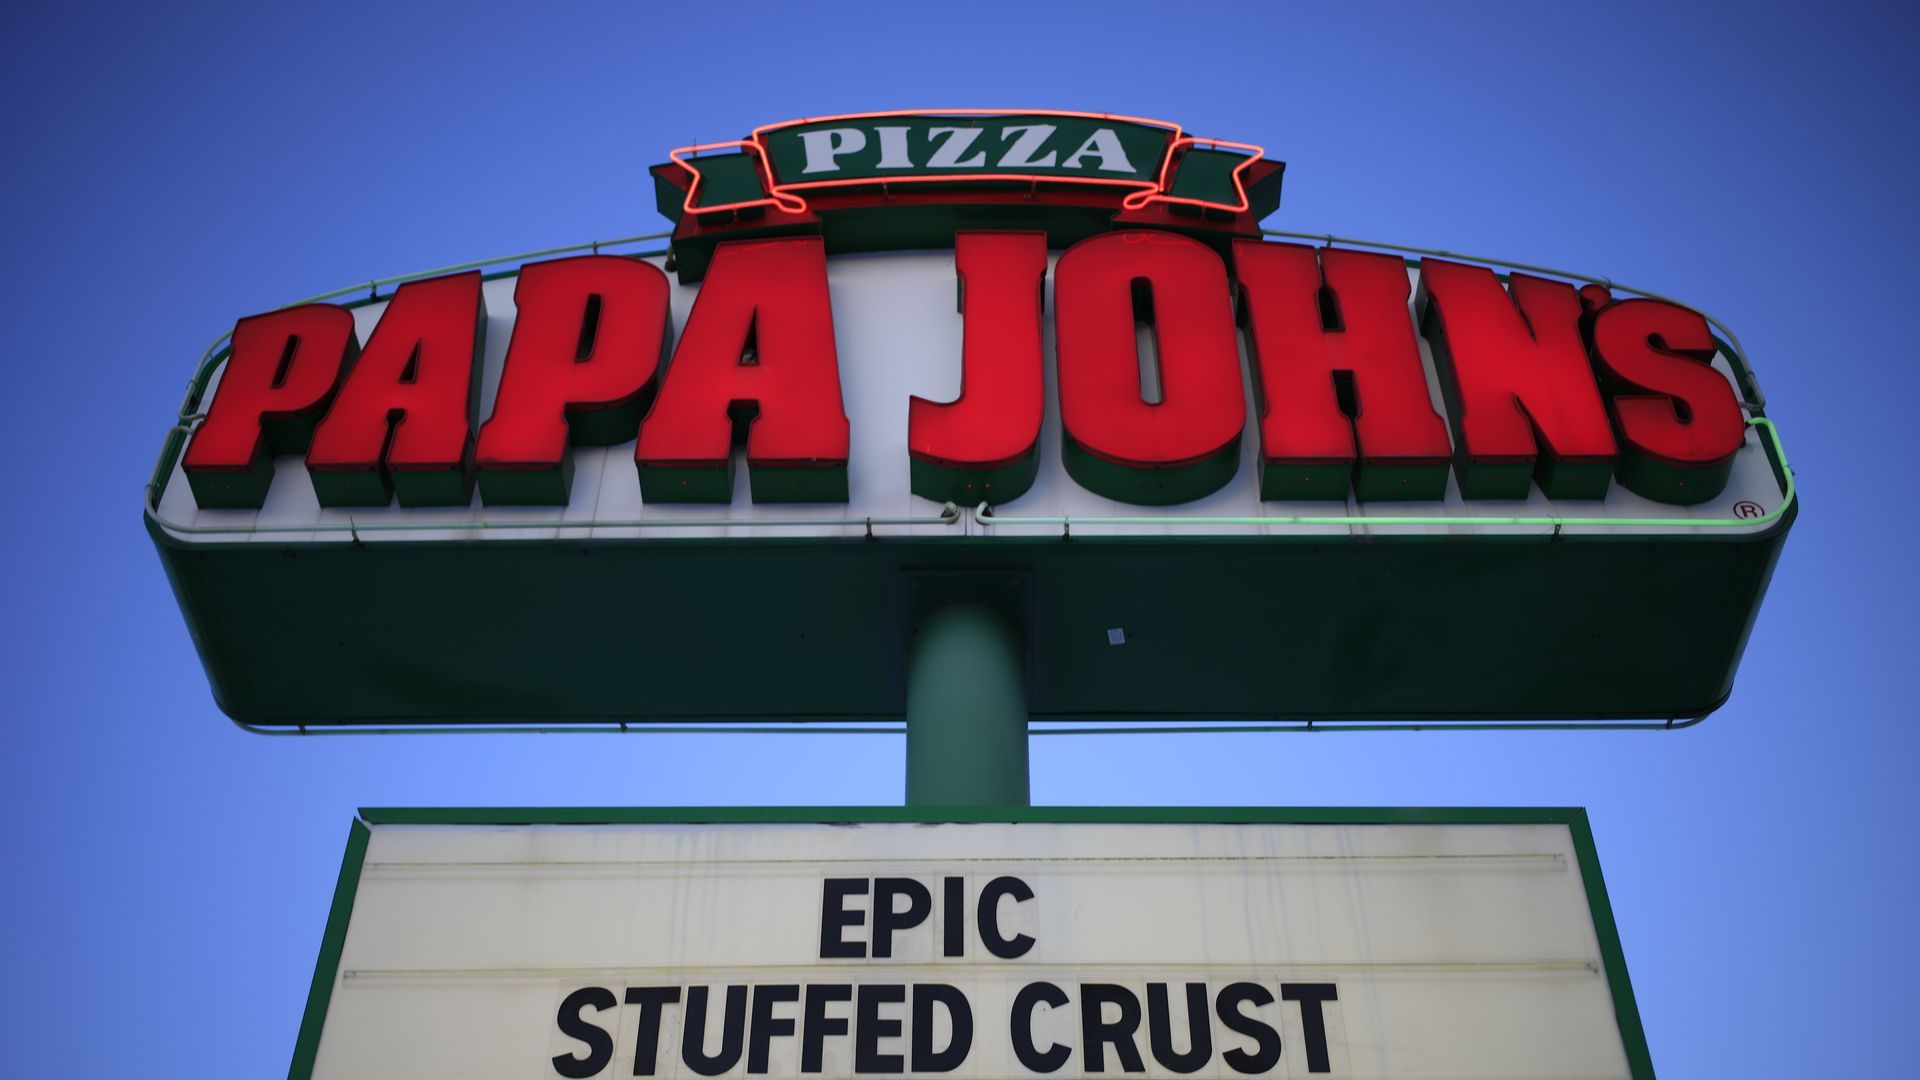 A Papa John's sign towers into the blue sky, its name spelled out in red letters.